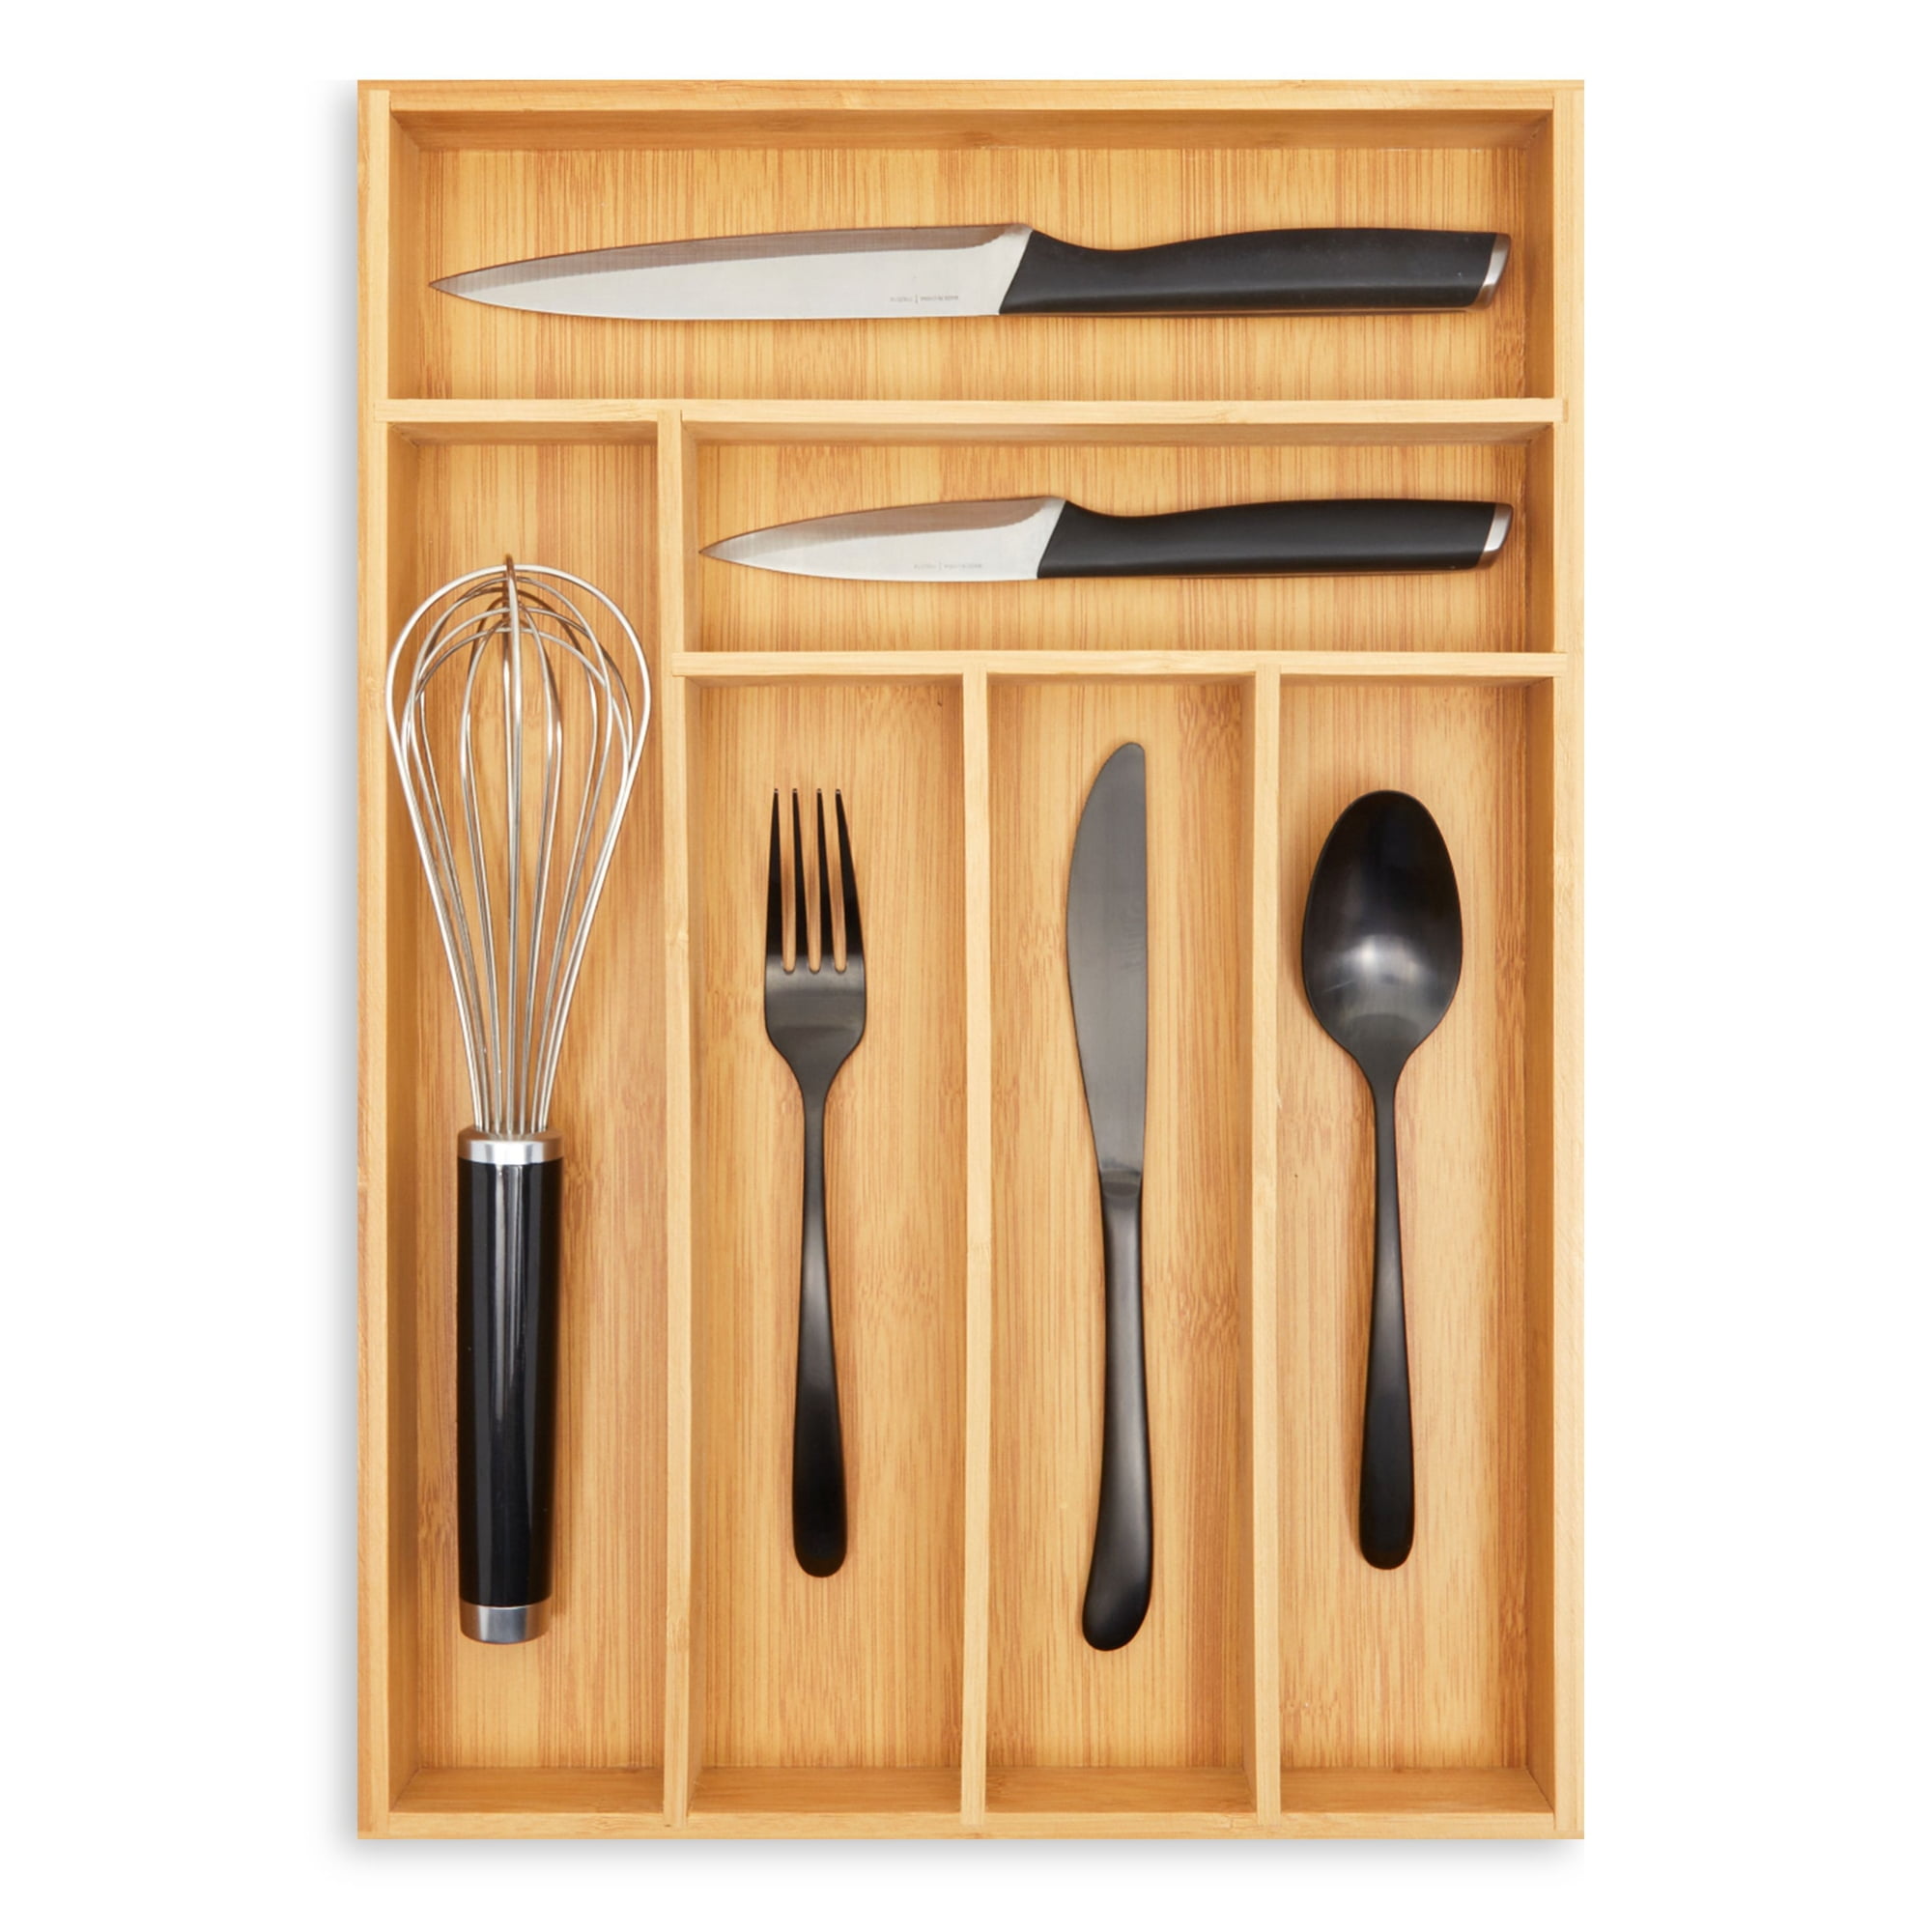 Elegant Designs Pantry Picks Farmhouse Wooden Flatware and Utensils Caddy Condiment Organize Natural Wood